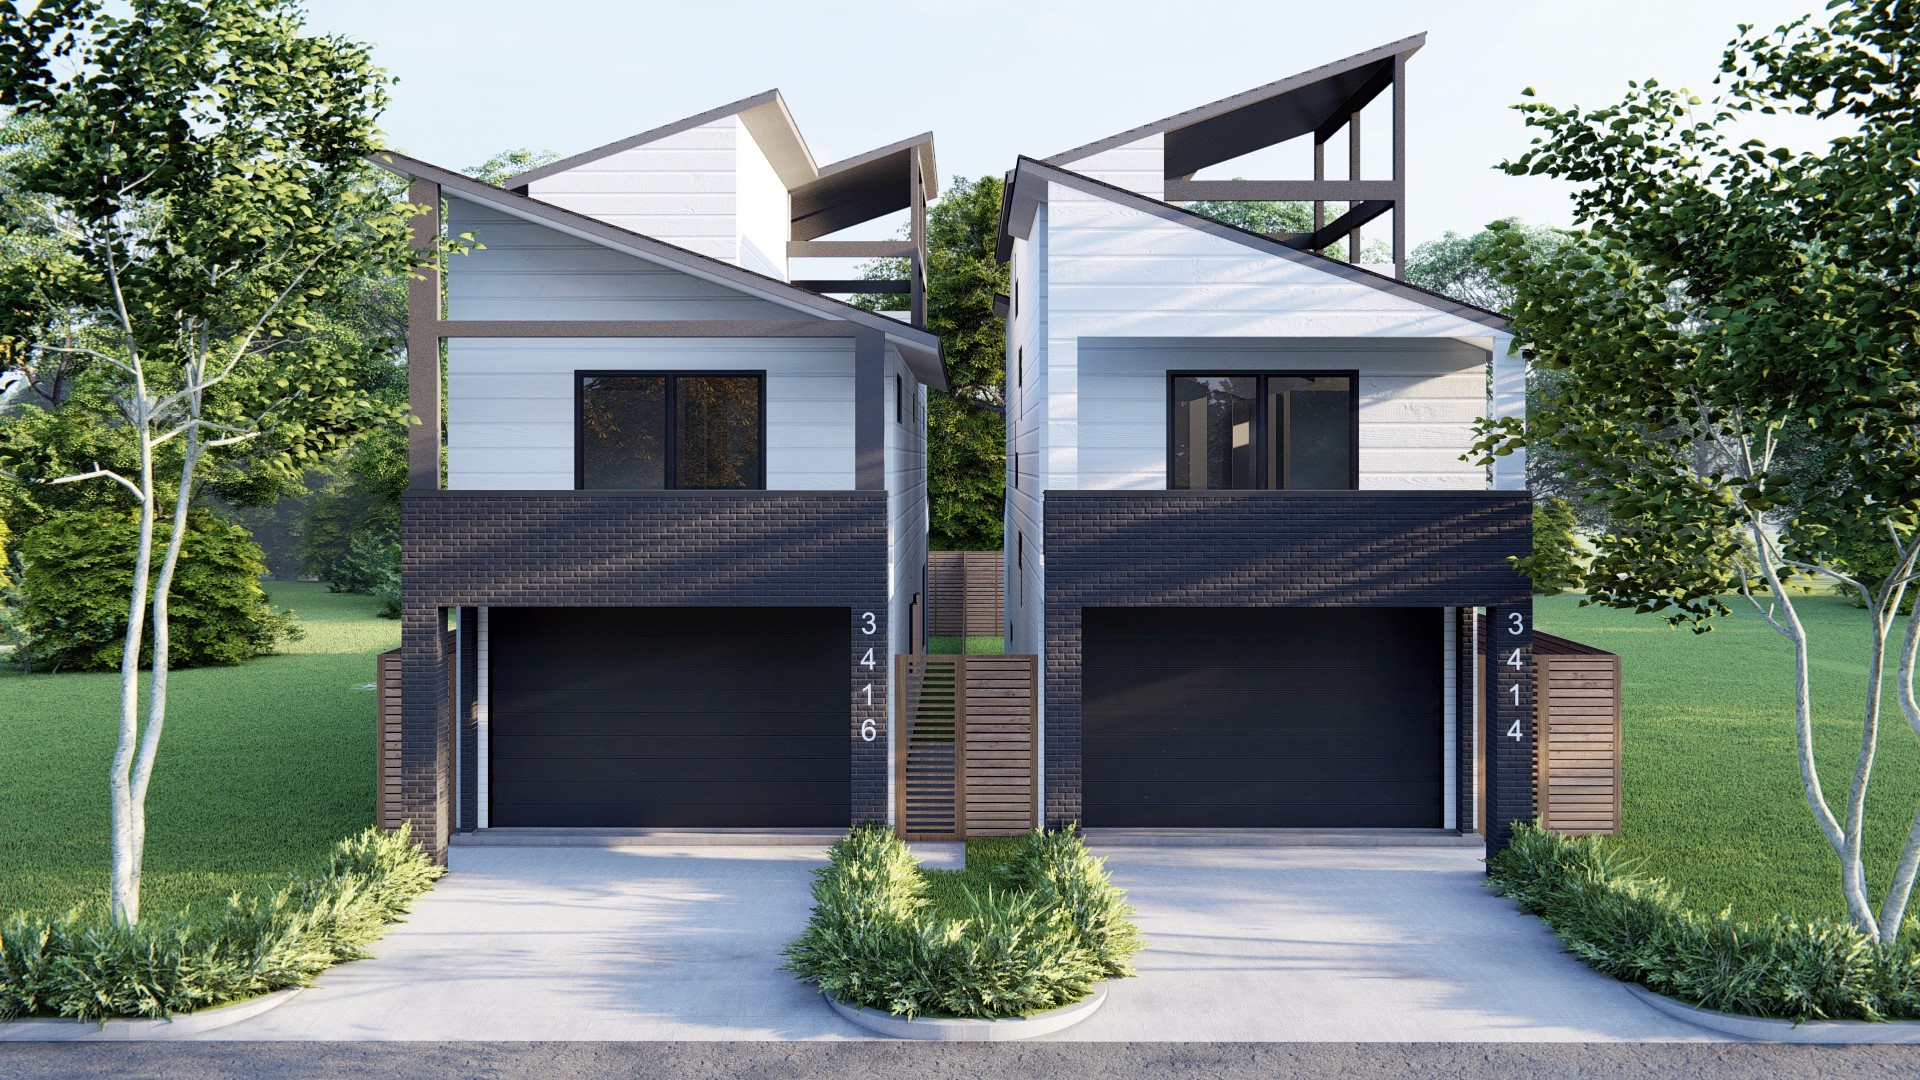 Architectural Rendering of Both Homes on Each Lot.